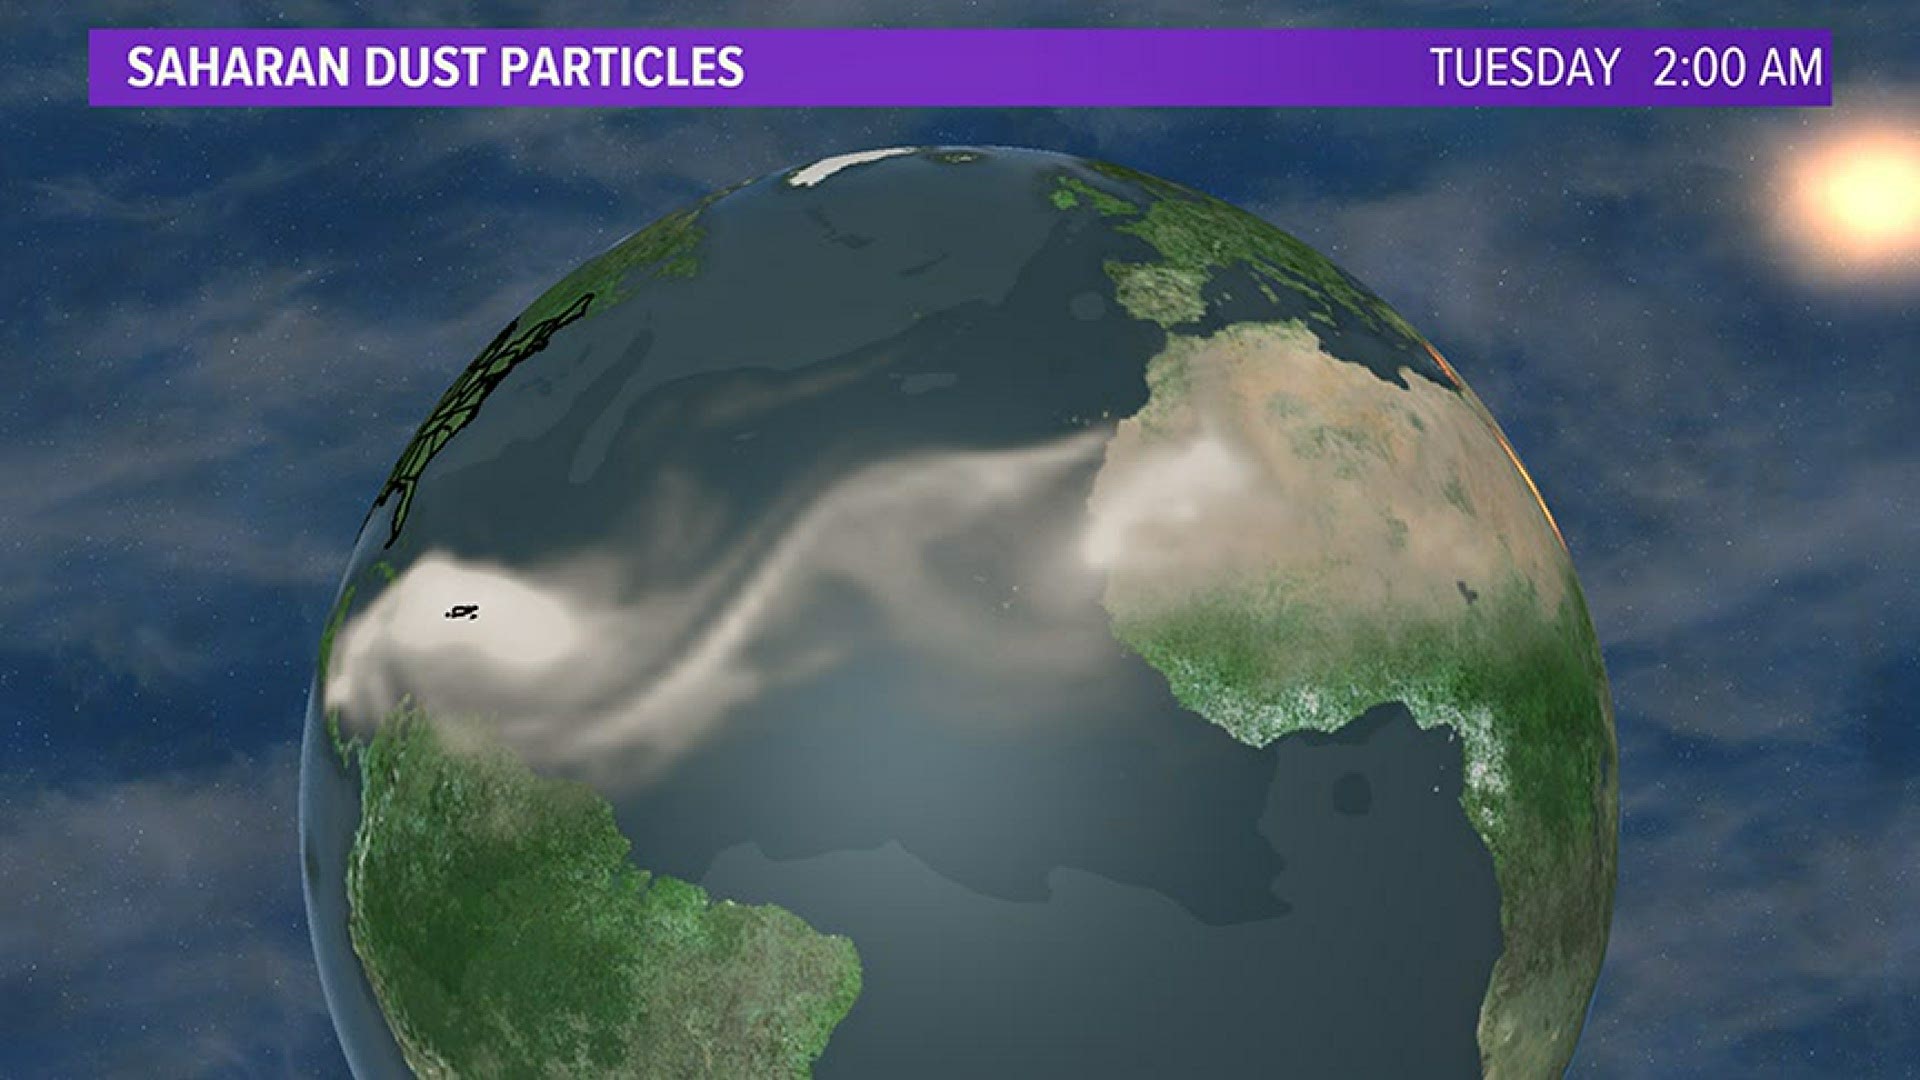 The video shows our Futurecast model predicting the arrival of the Saharan dust to the Ohio Valley this weekend.